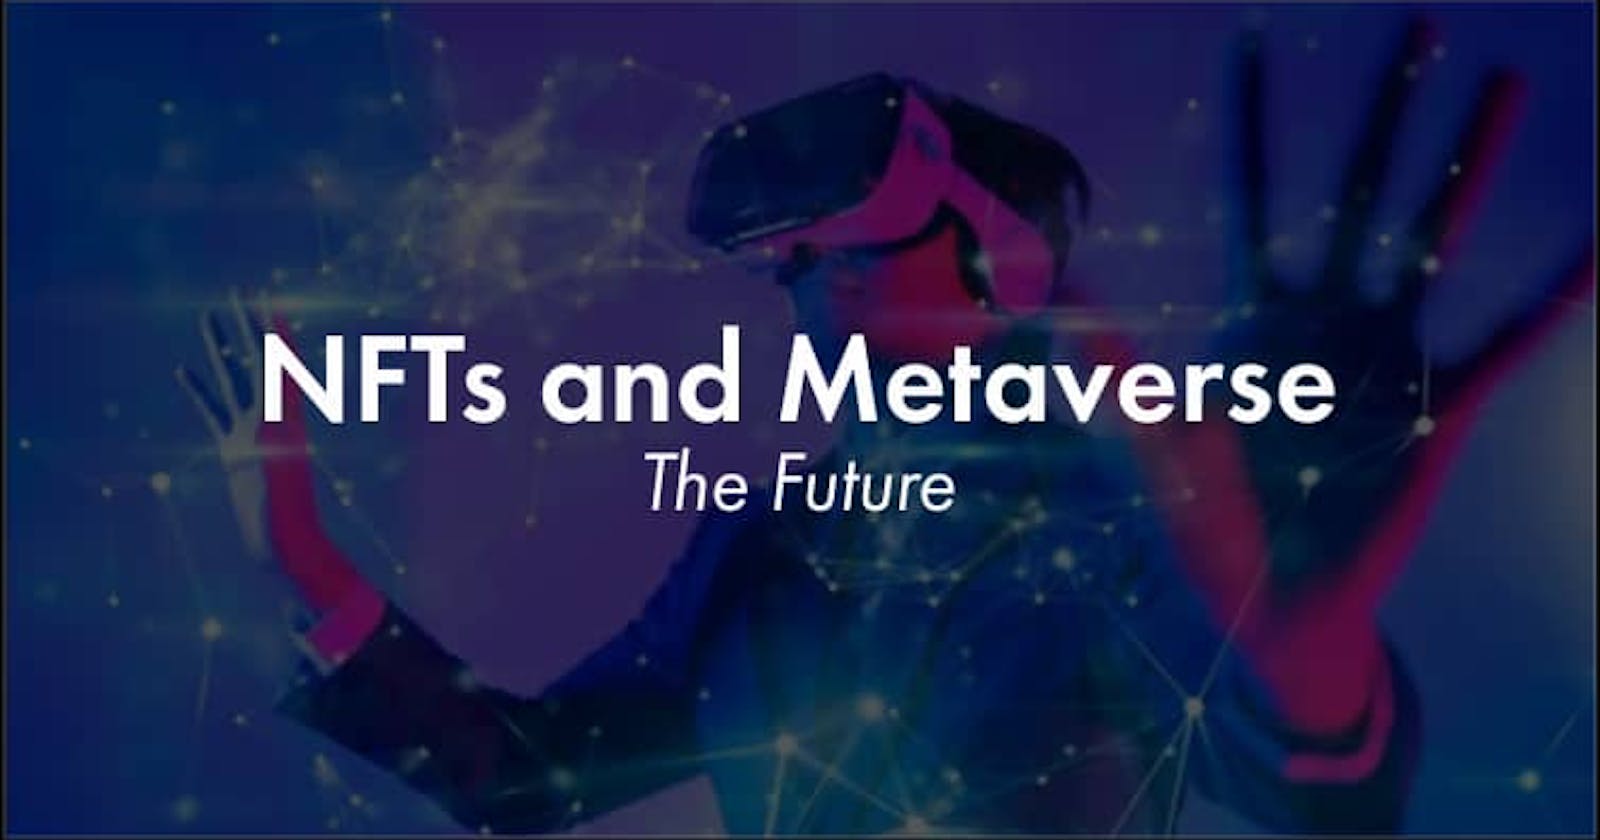 NFT and Metaverse: The Future